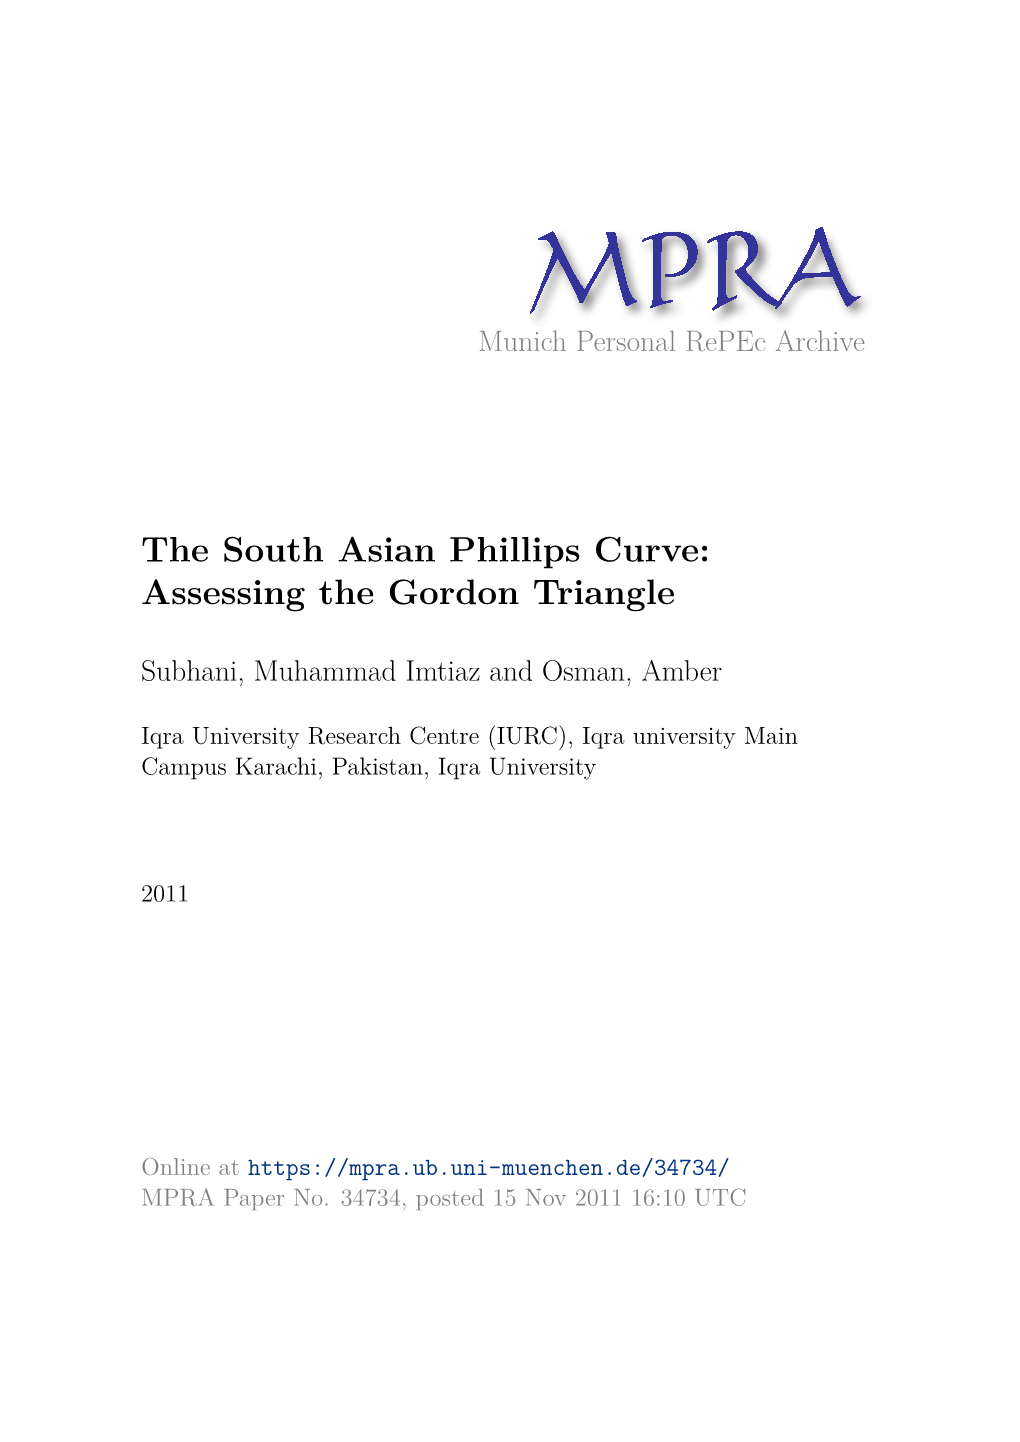 The South Asian Phillips Curve: Assessing the Gordon Triangle